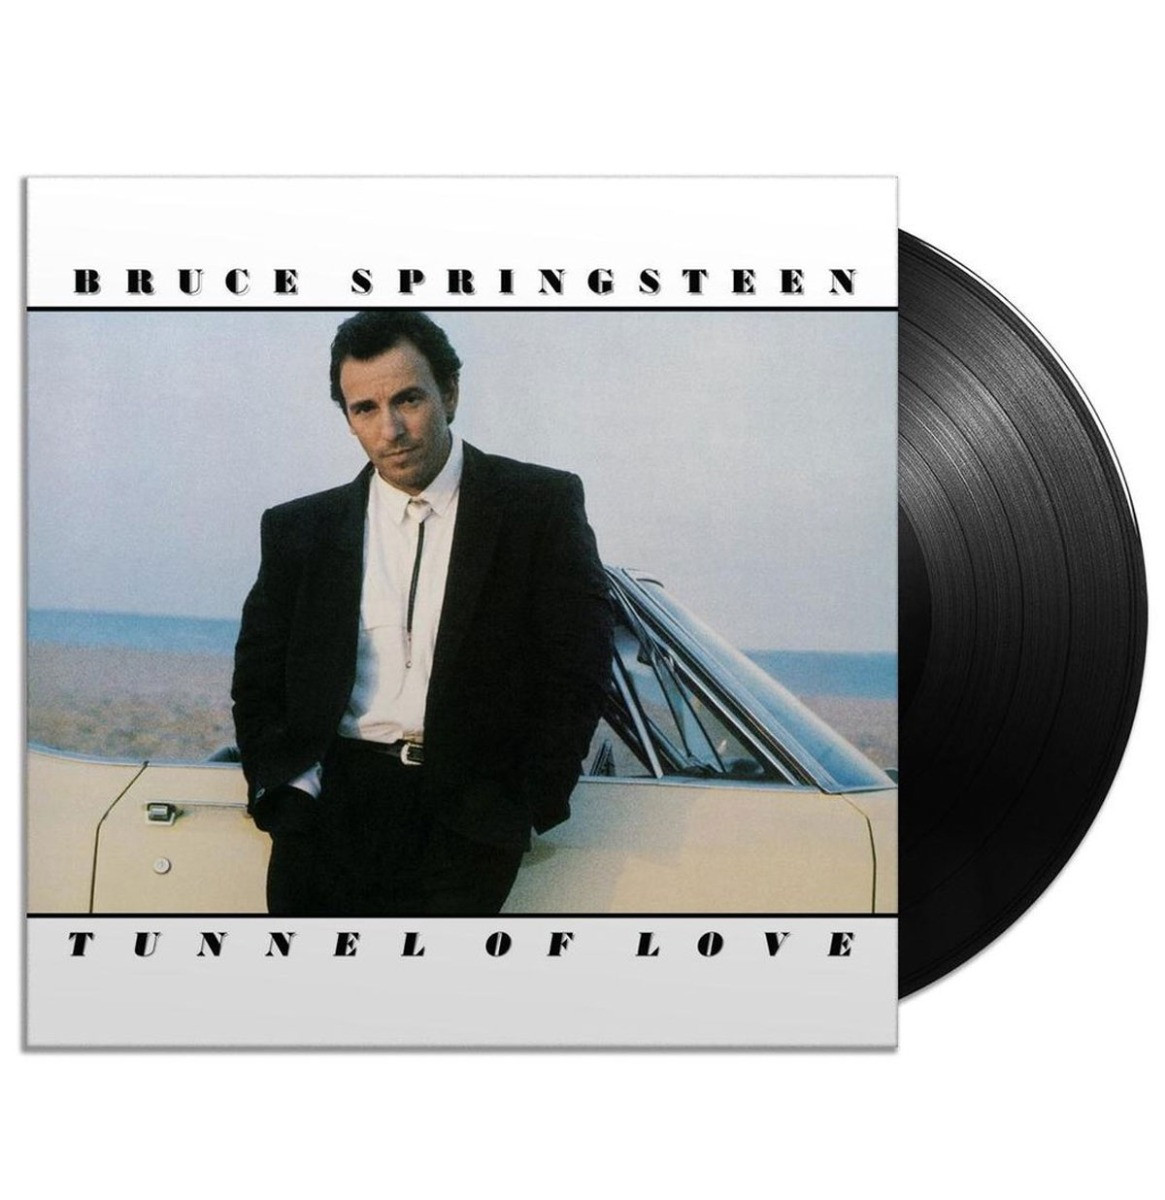 Bruce Springsteen - Tunnel Of Love 2-LP